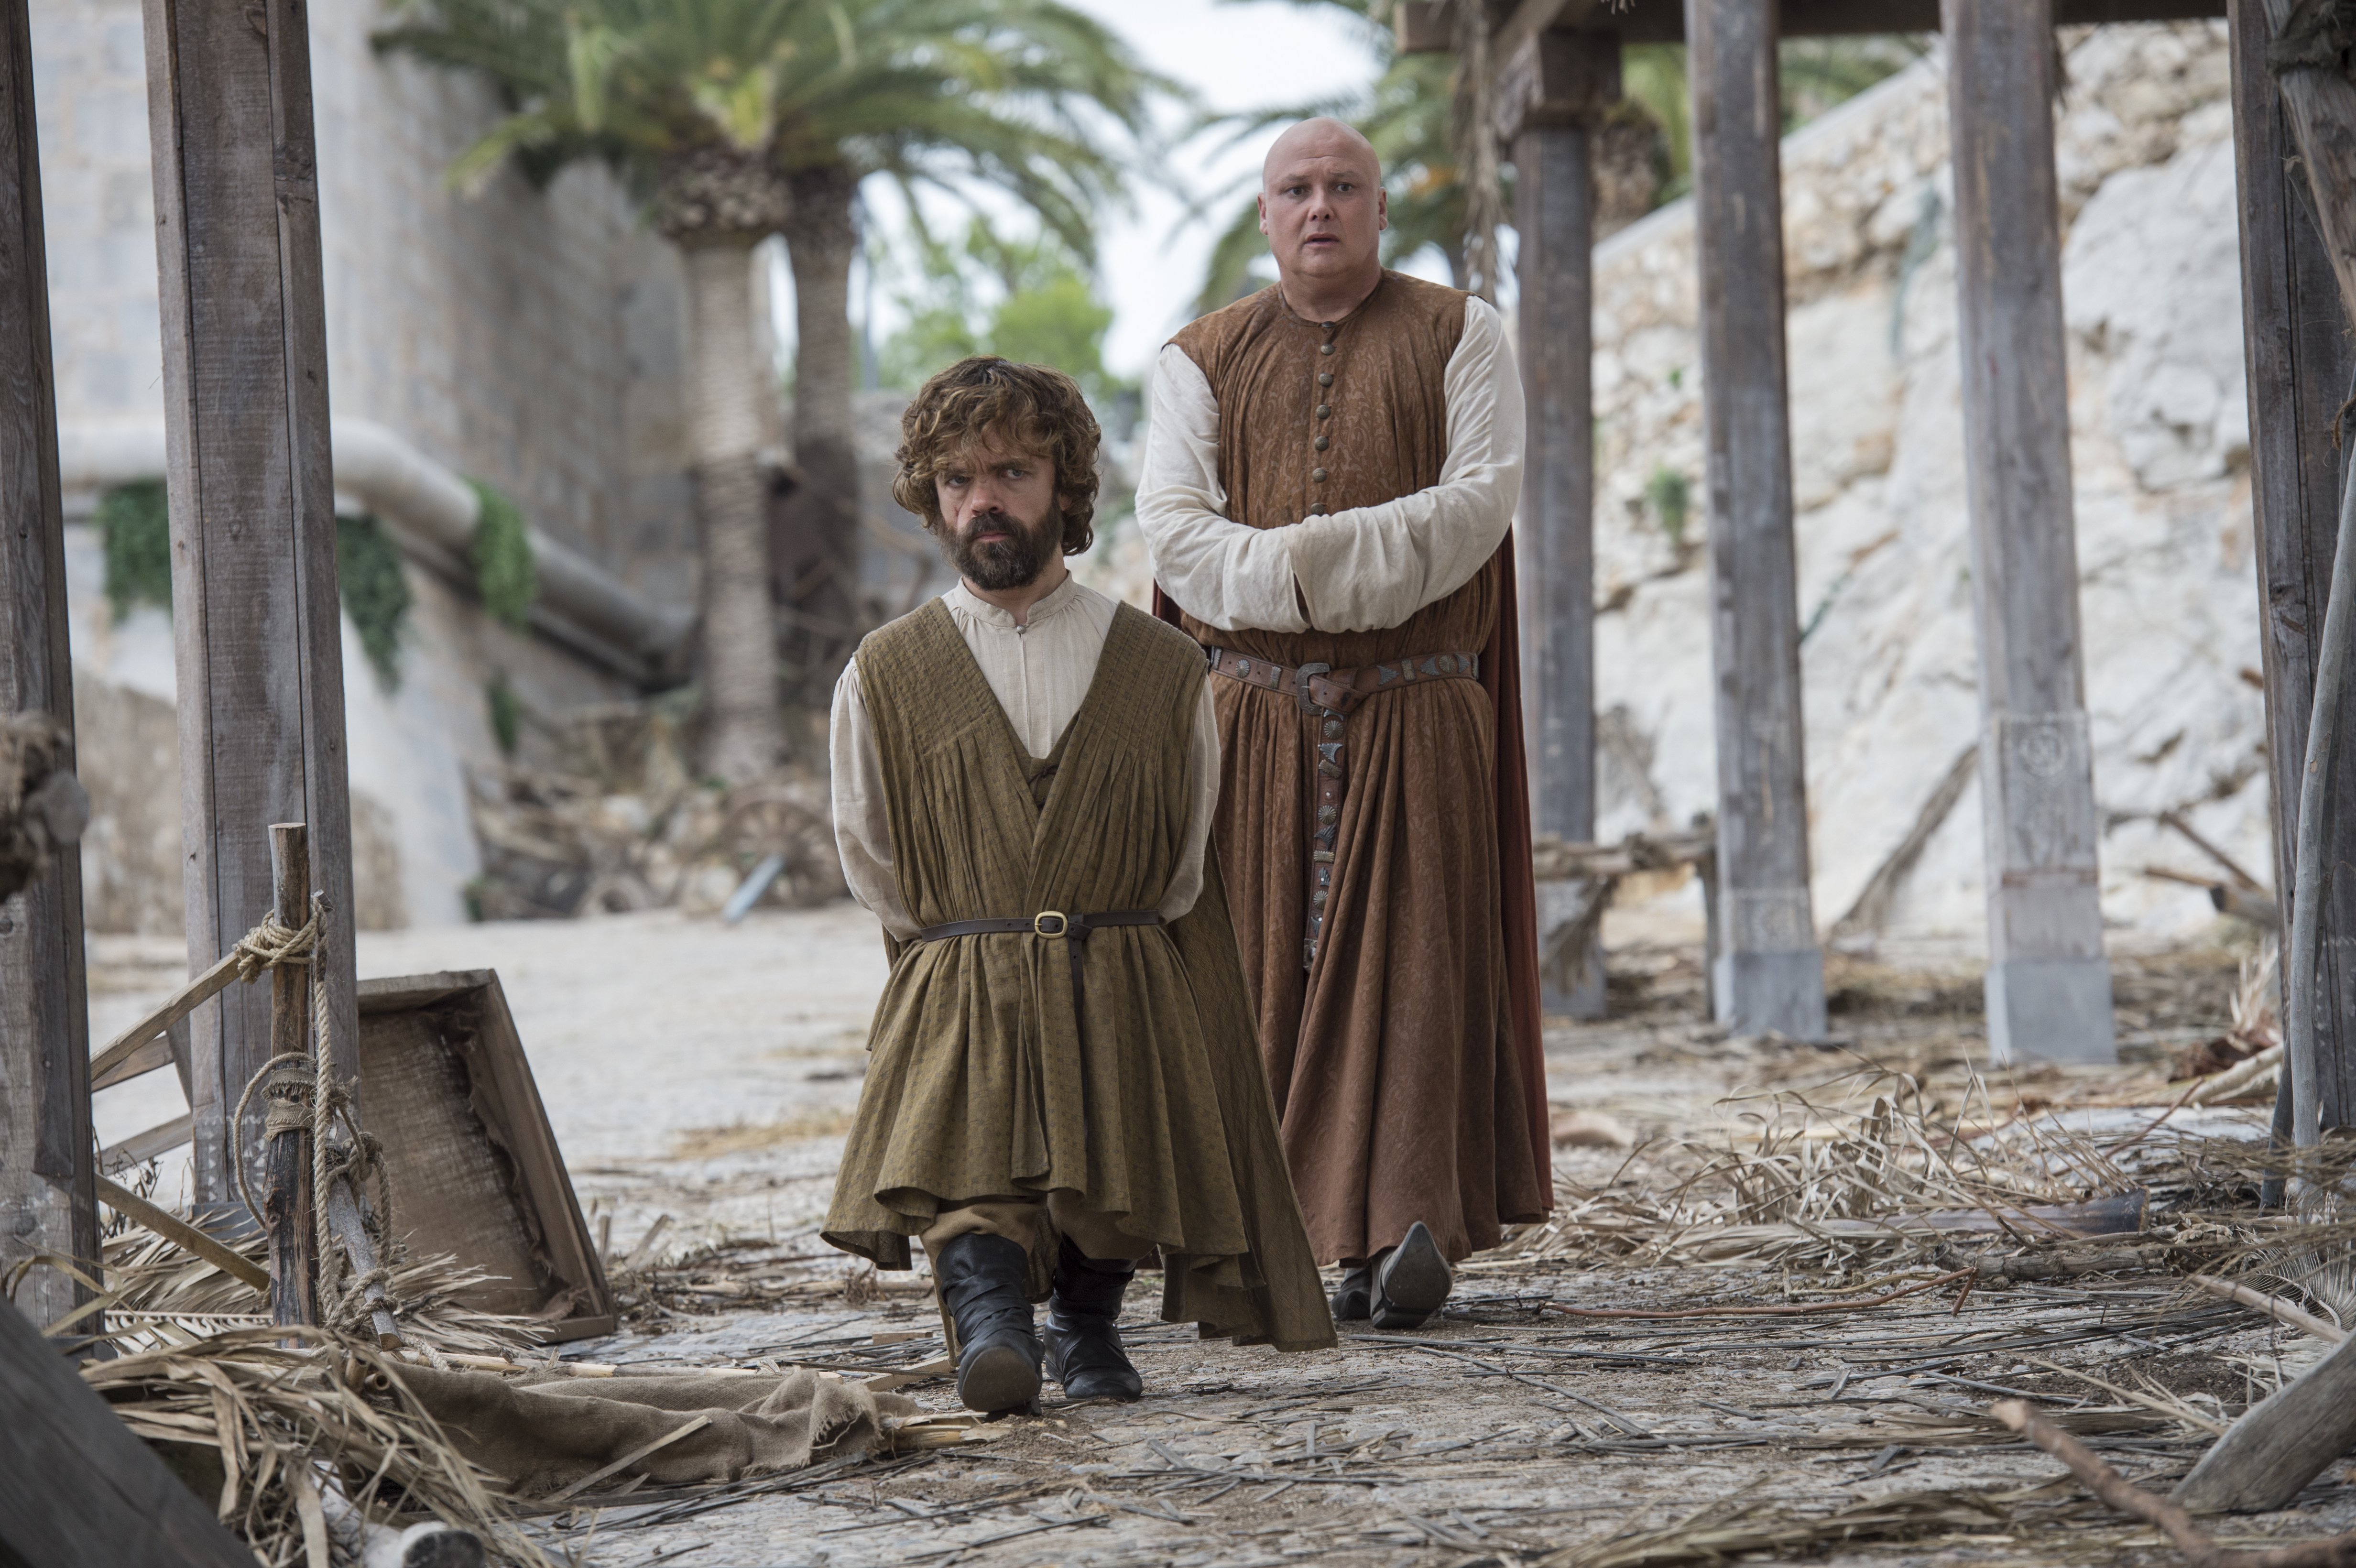 Conleth Hill Game Of Thrones Lord Varys Peter Dinklage Tyrion Lannister 4928x3280